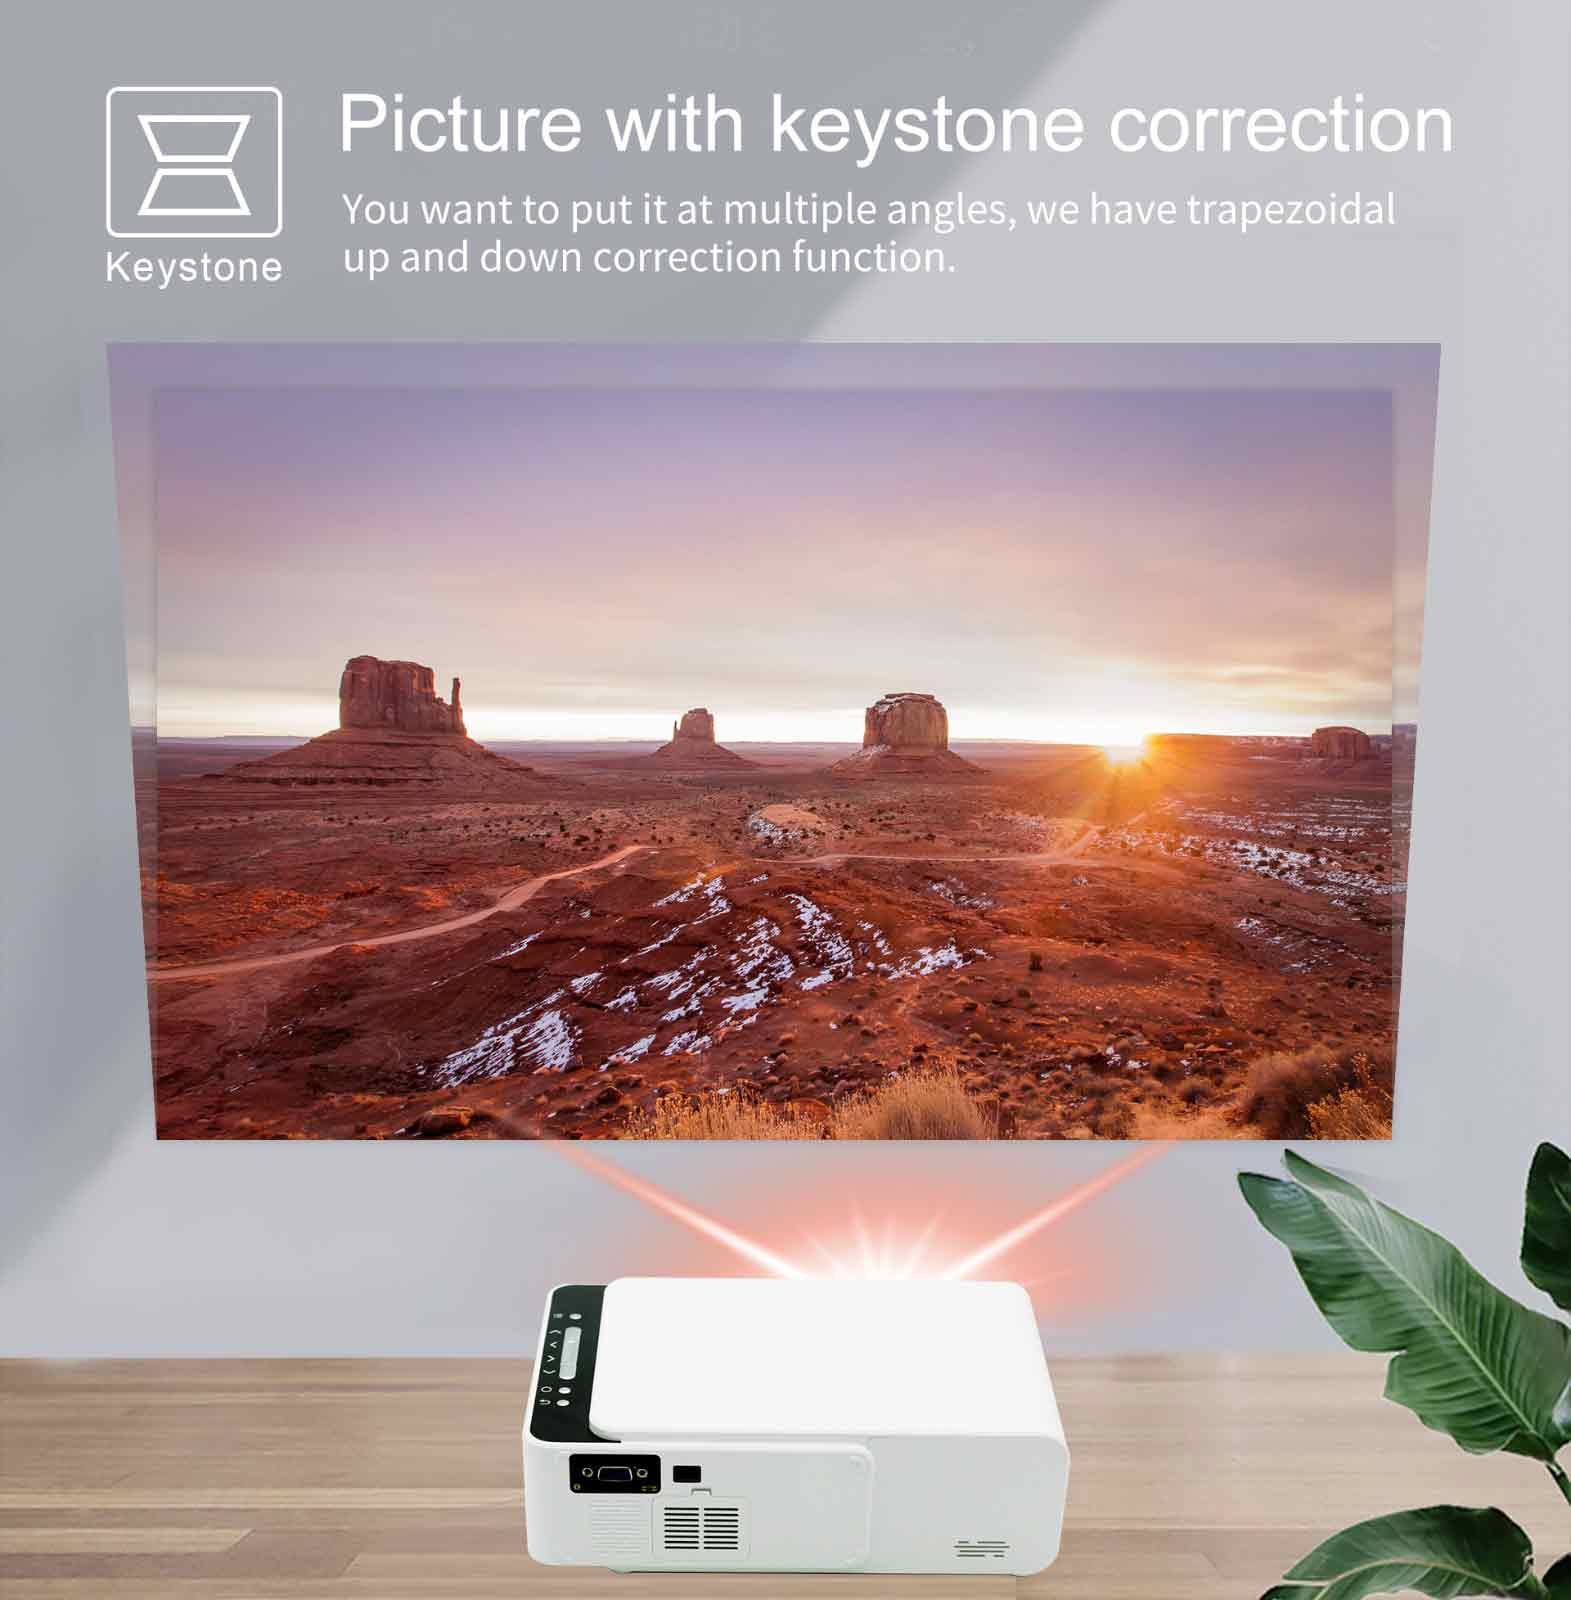 T5 YouTube Version WiFi Projector - 2600 Lumens 600p Video Projector - White